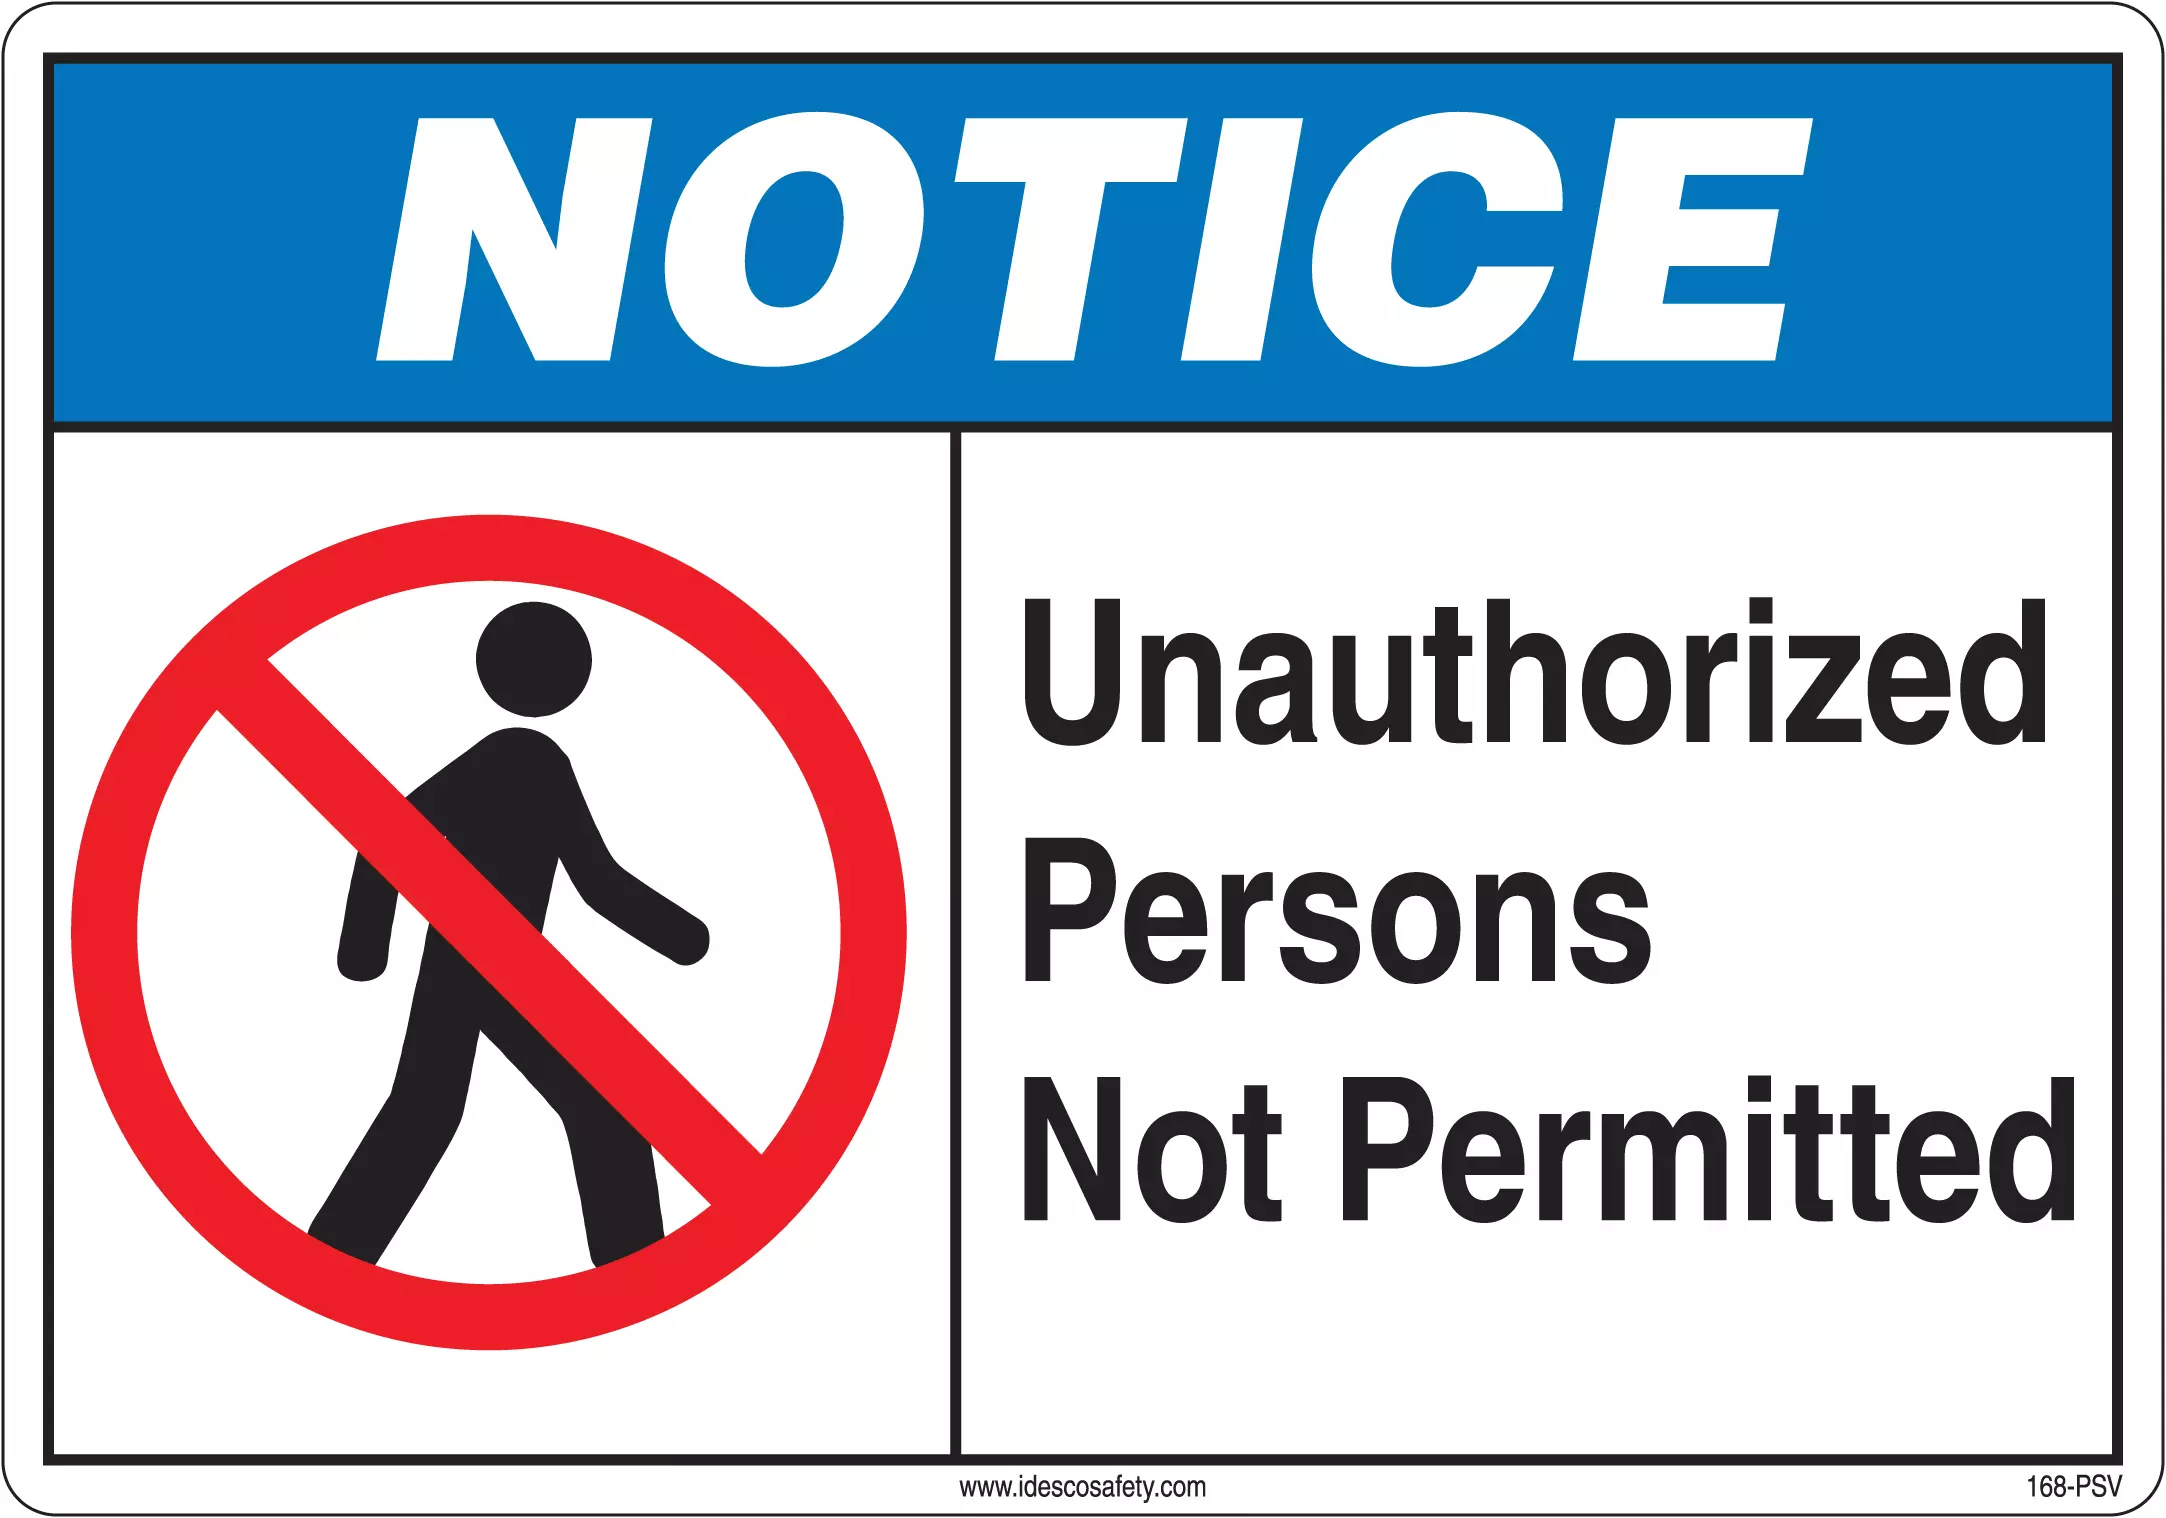 The product is not permitted. Signs and Notices. Notice табличка. Unauthorized persons not permitted. The language of signs and Notices.